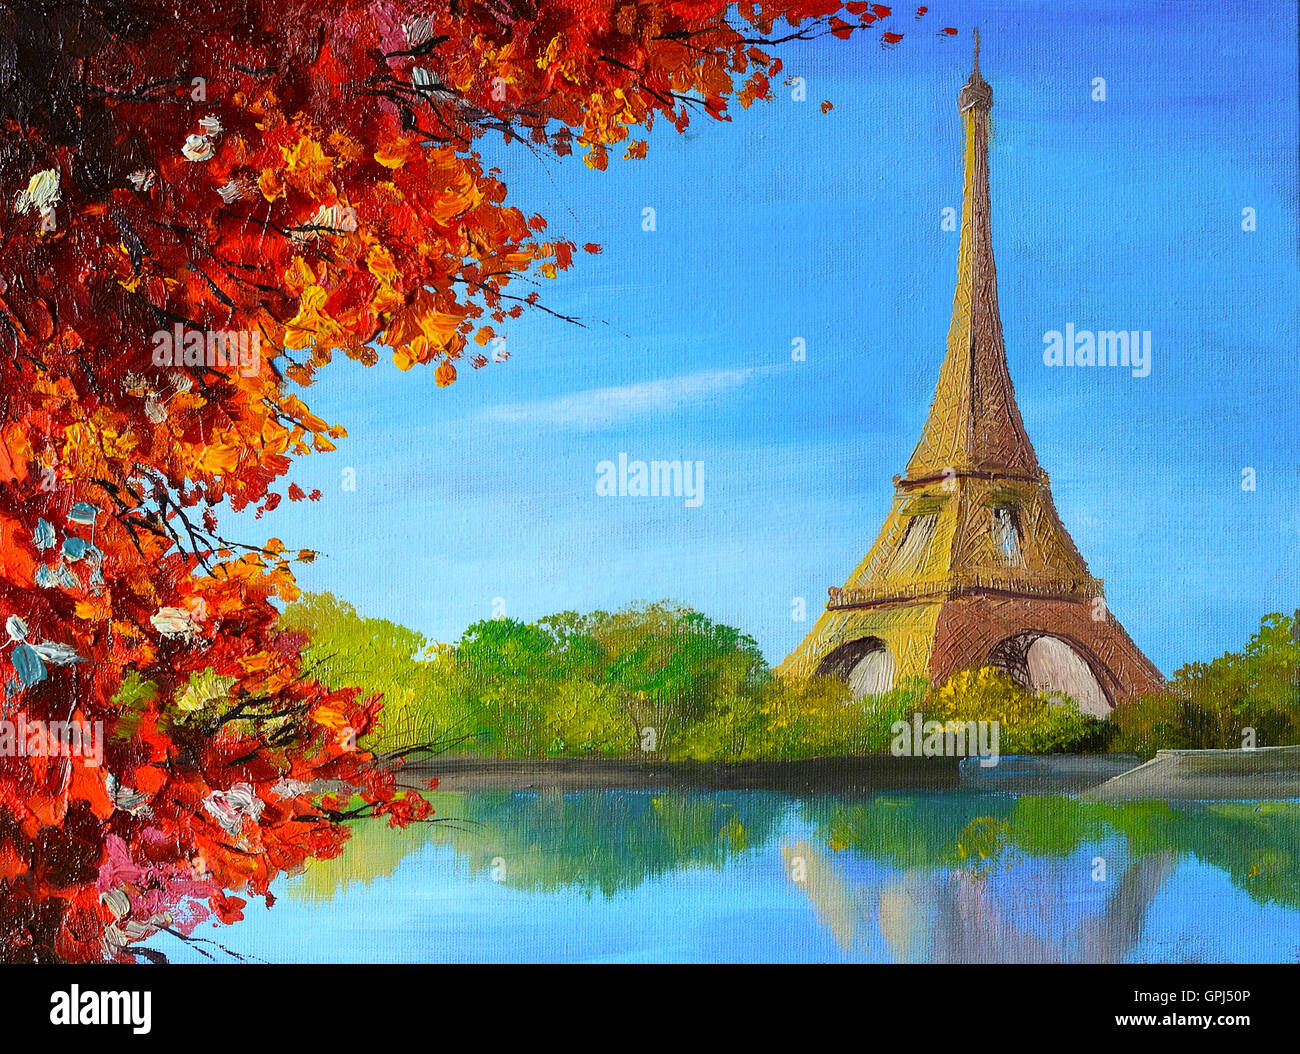 oil painting - lake near the Eiffel Tower Stock Photo